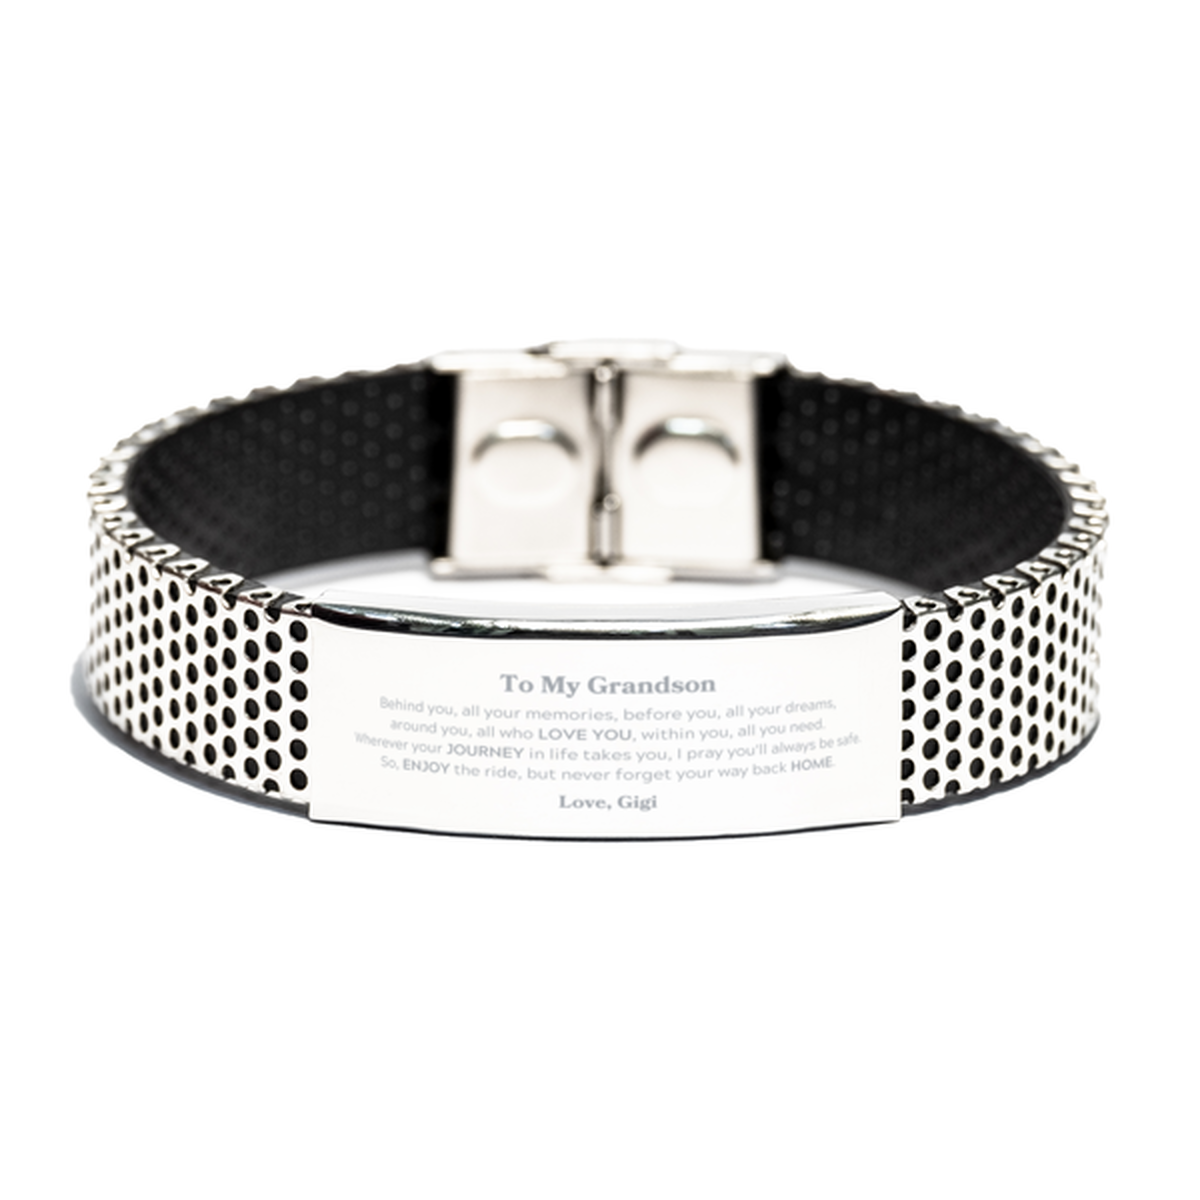 To My Grandson Graduation Gifts from Gigi, Grandson Stainless Steel Bracelet Christmas Birthday Gifts for Grandson Behind you, all your memories, before you, all your dreams. Love, Gigi